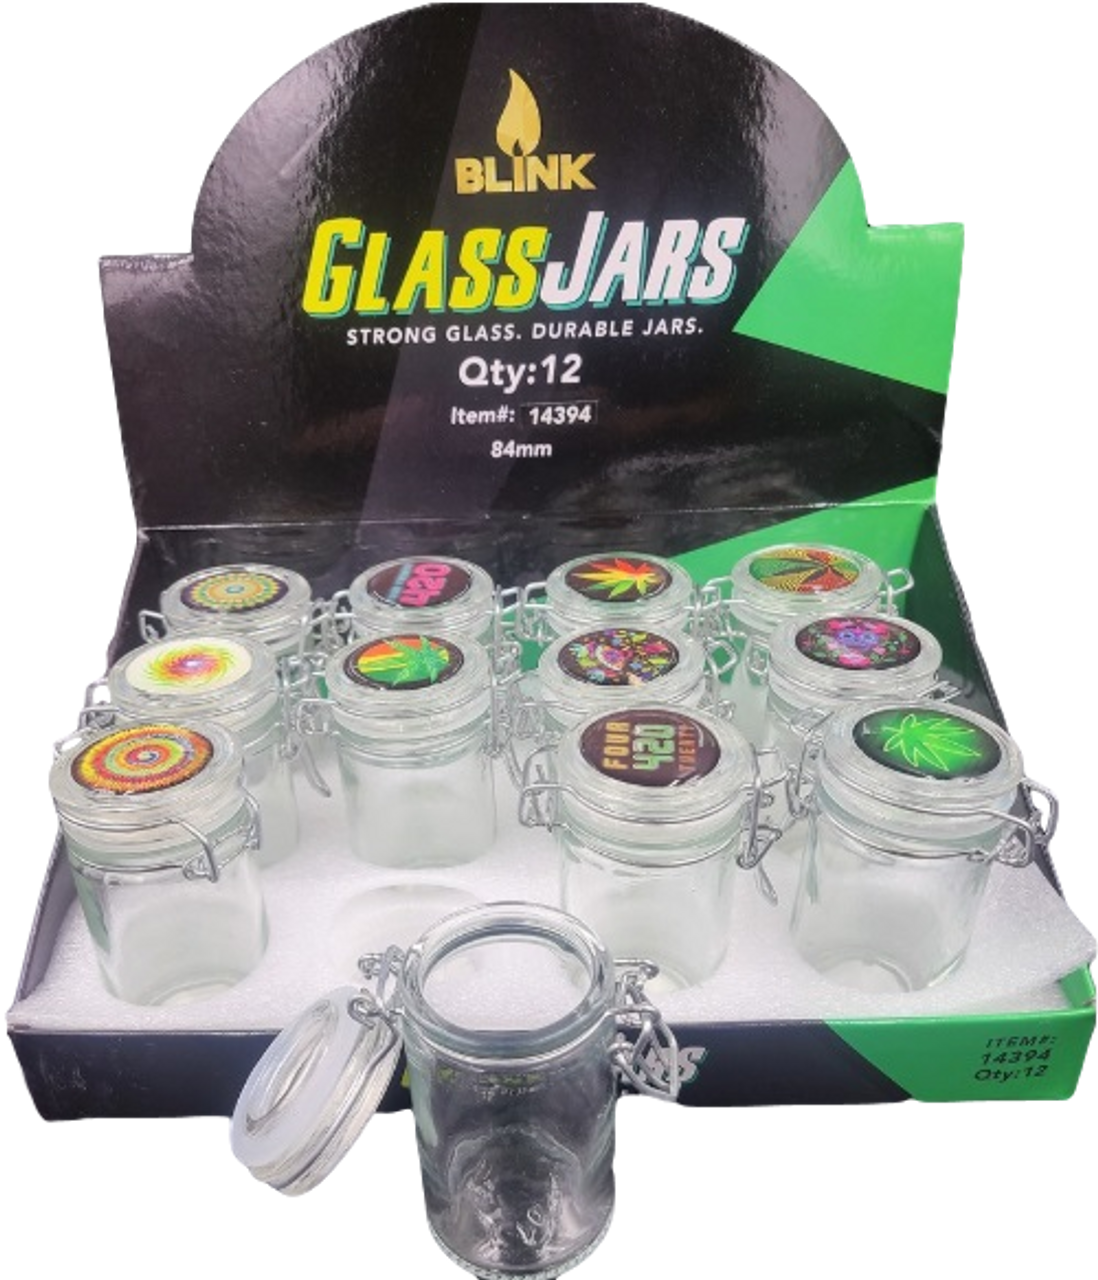 Blink Air Tight Glass Jars with Latch Top (holds 3.5g), 12 pk